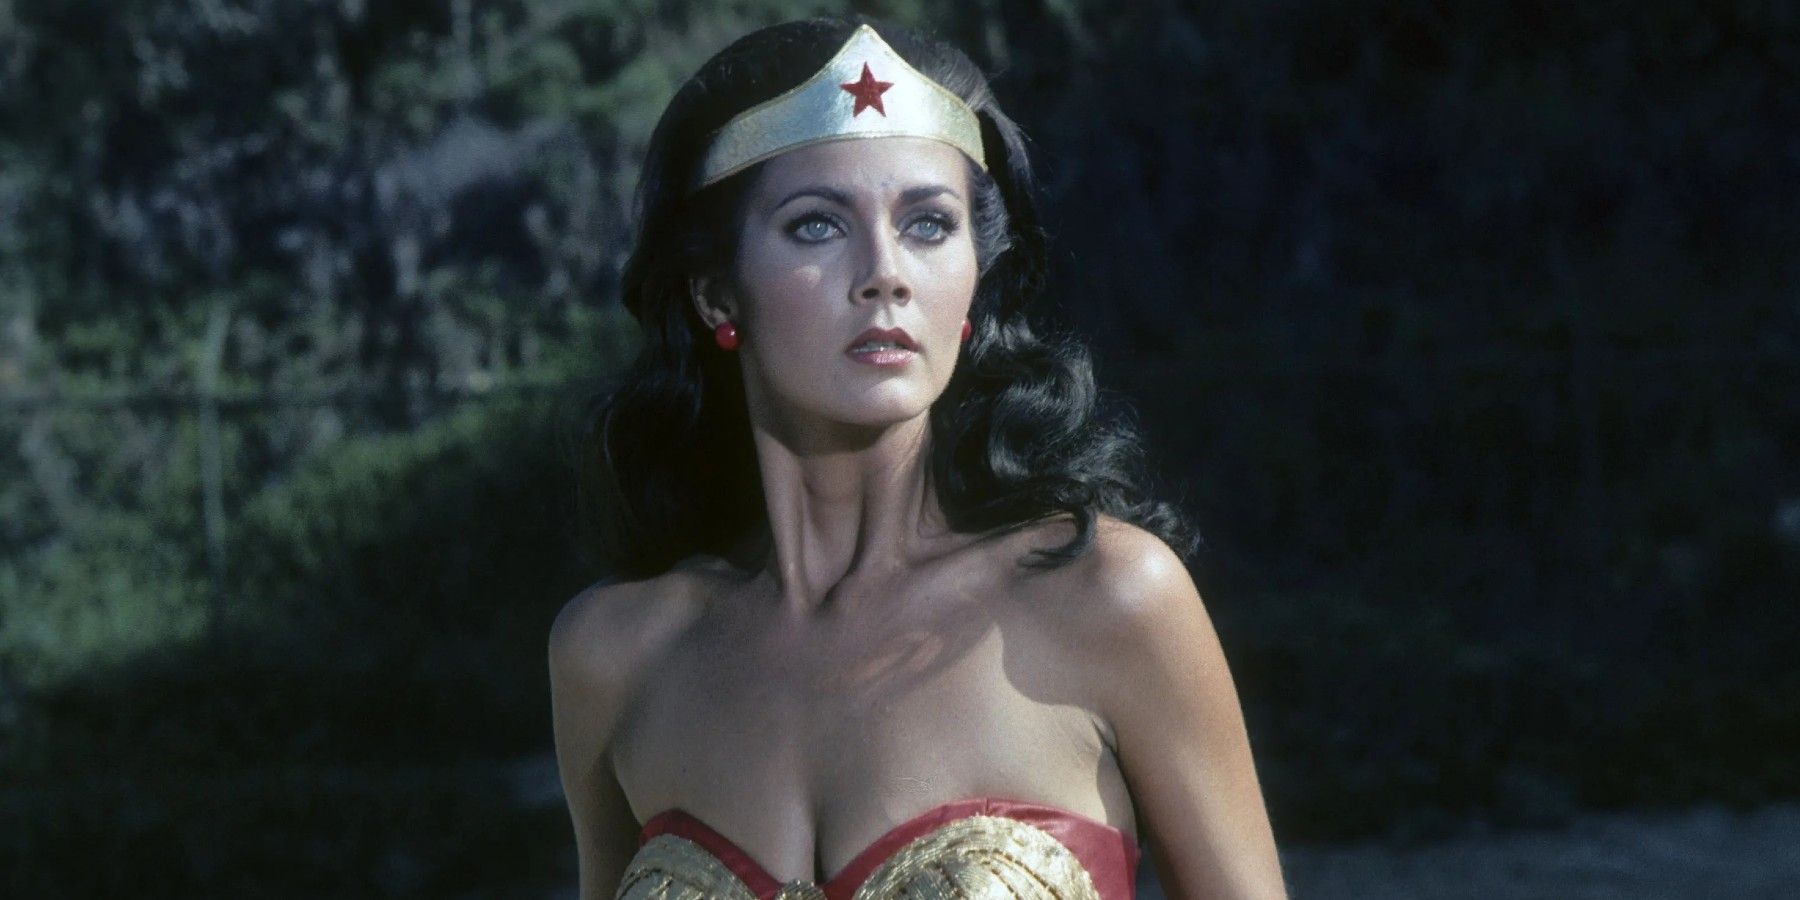 Wonder Woman 1984 Post Credit Scene Explained - Who is Asteria Played By  Actress Lynda Carter?